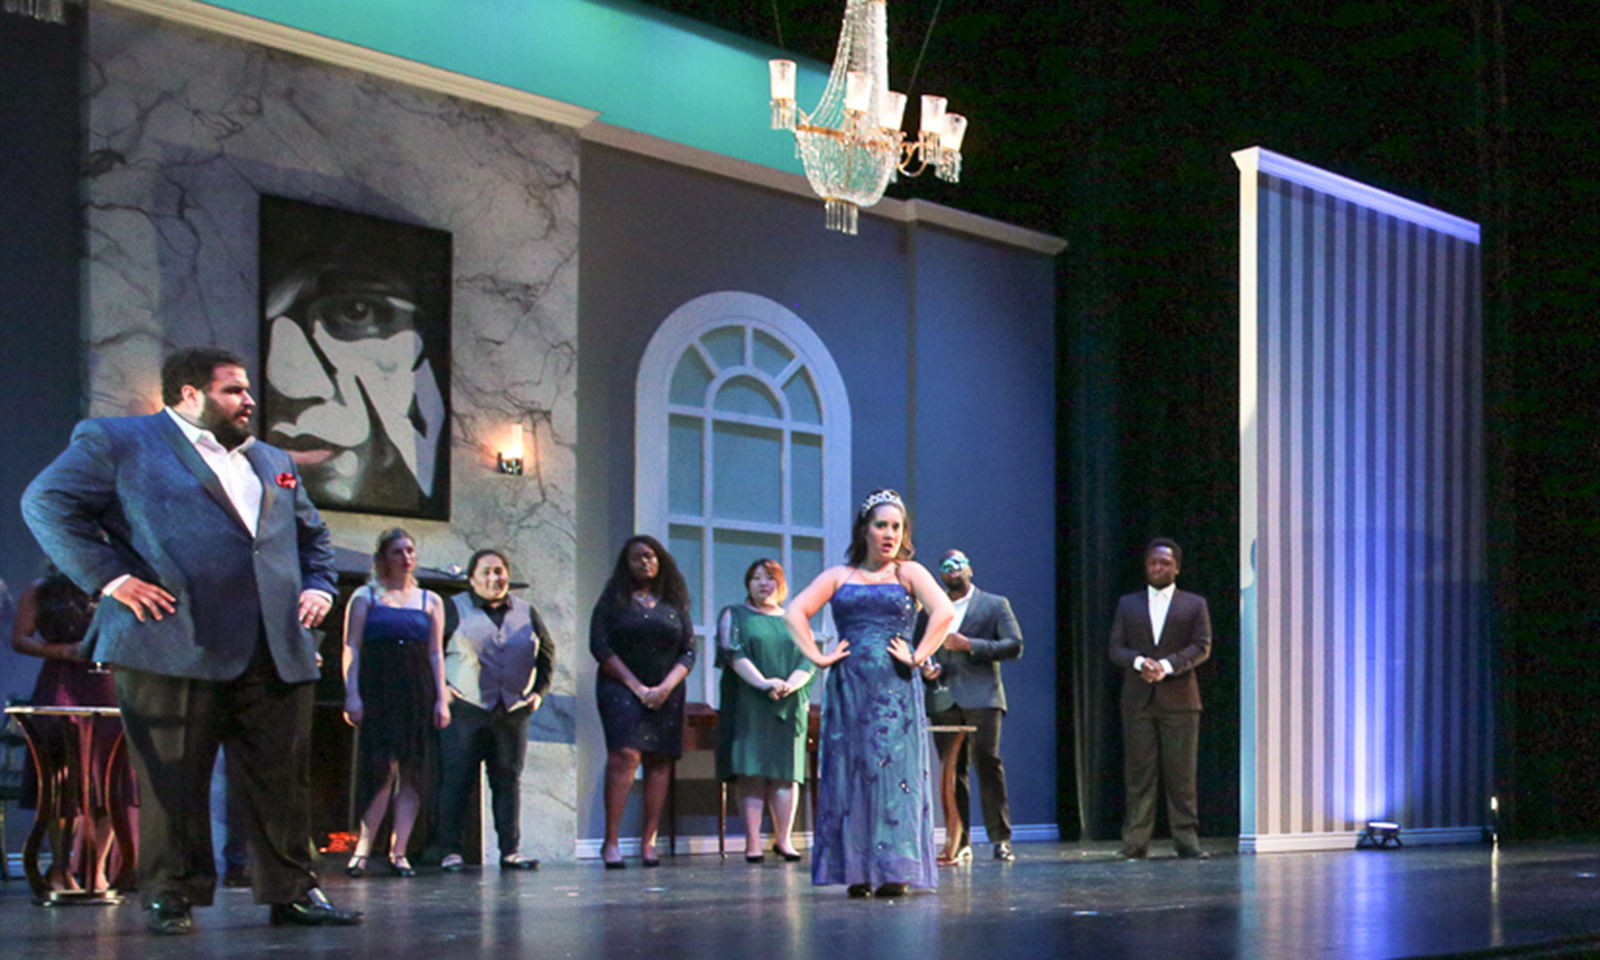 UCI students to perform Puccini opera